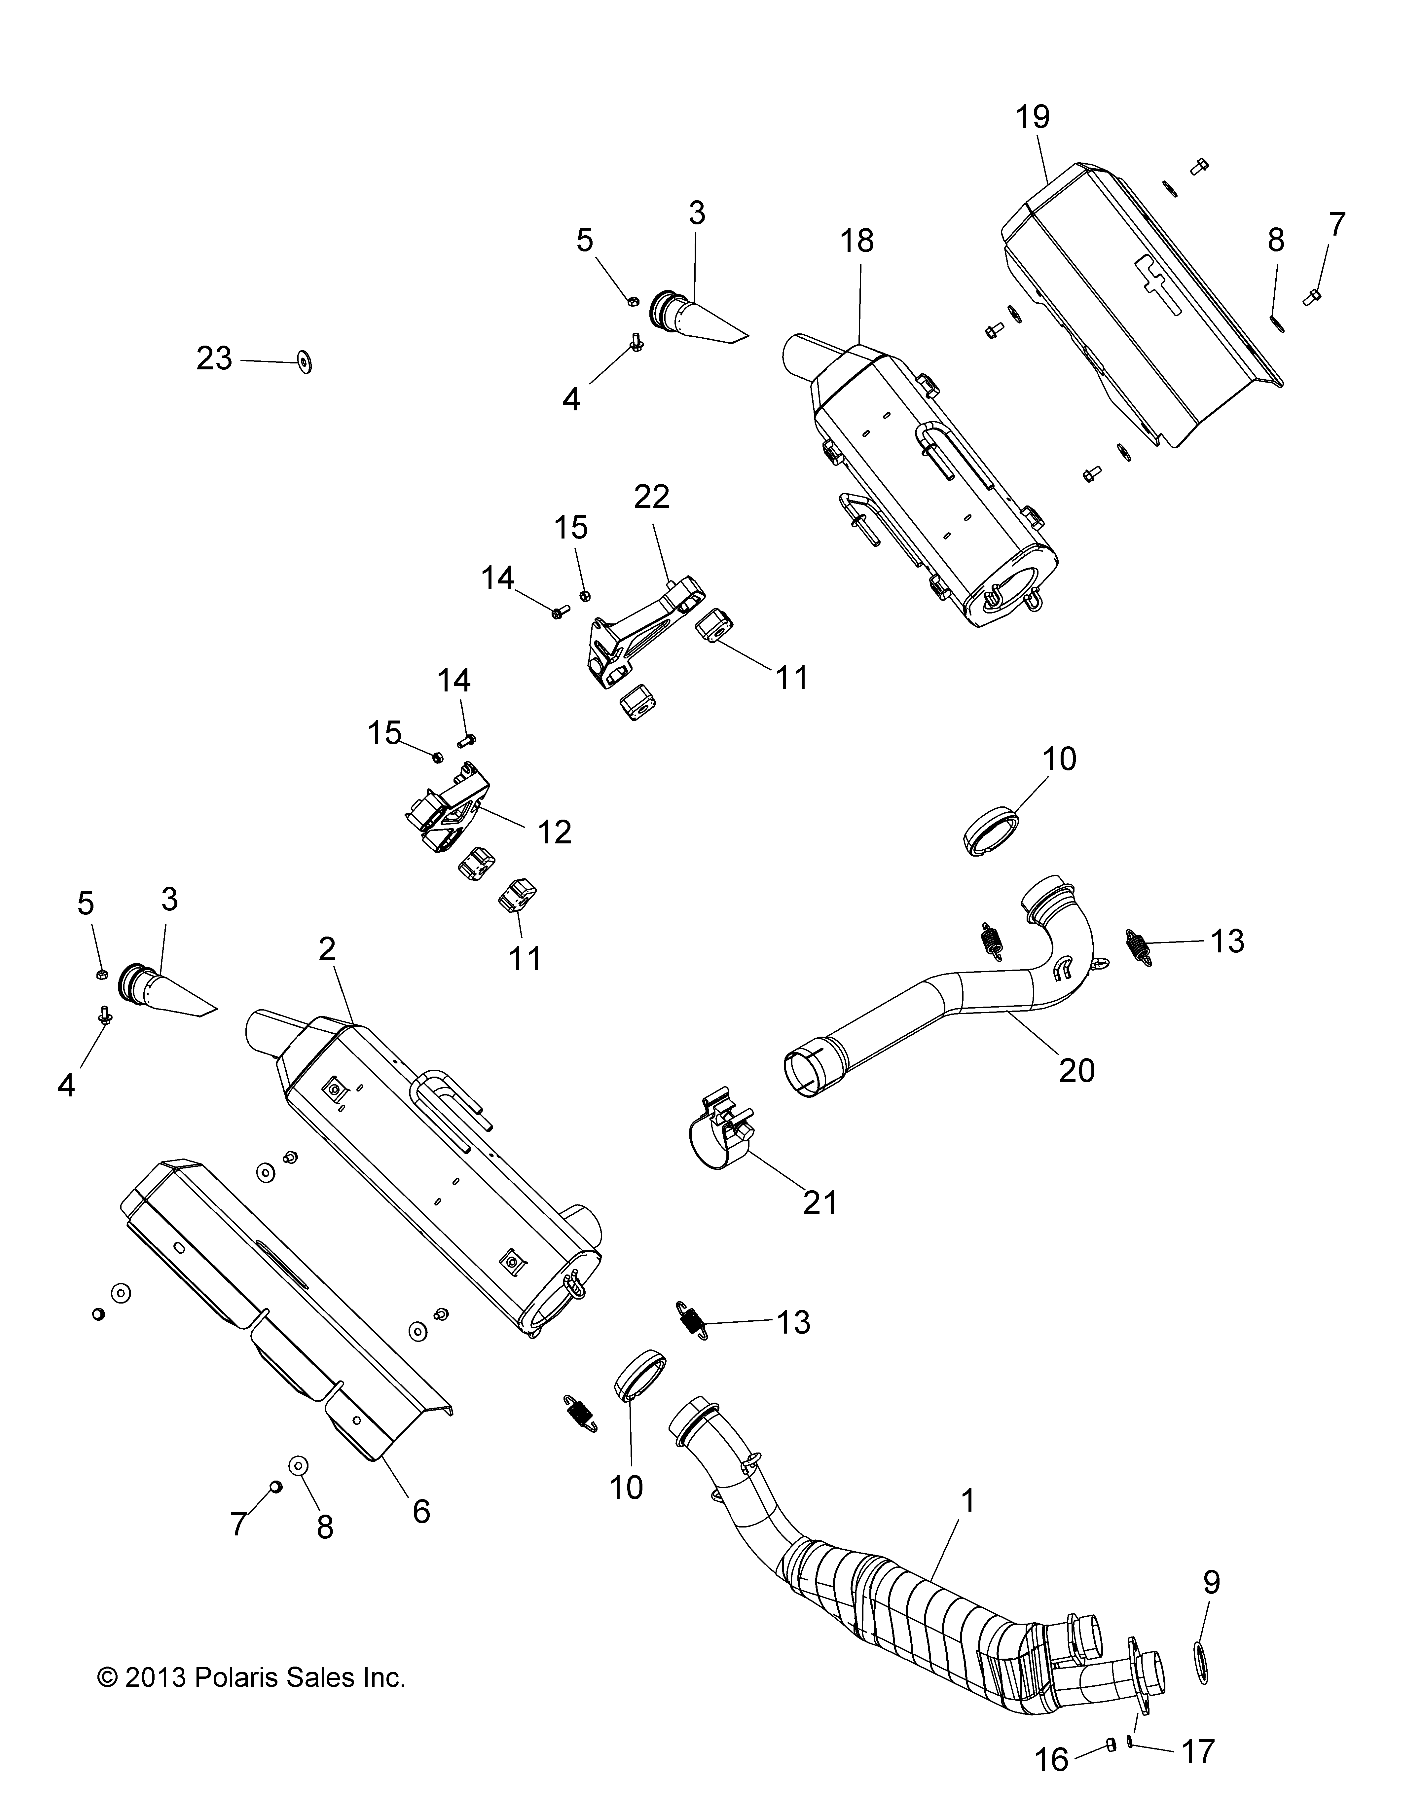 Part Number : 1262642 TWIN EXHAUST PIPE ASSEMBLY